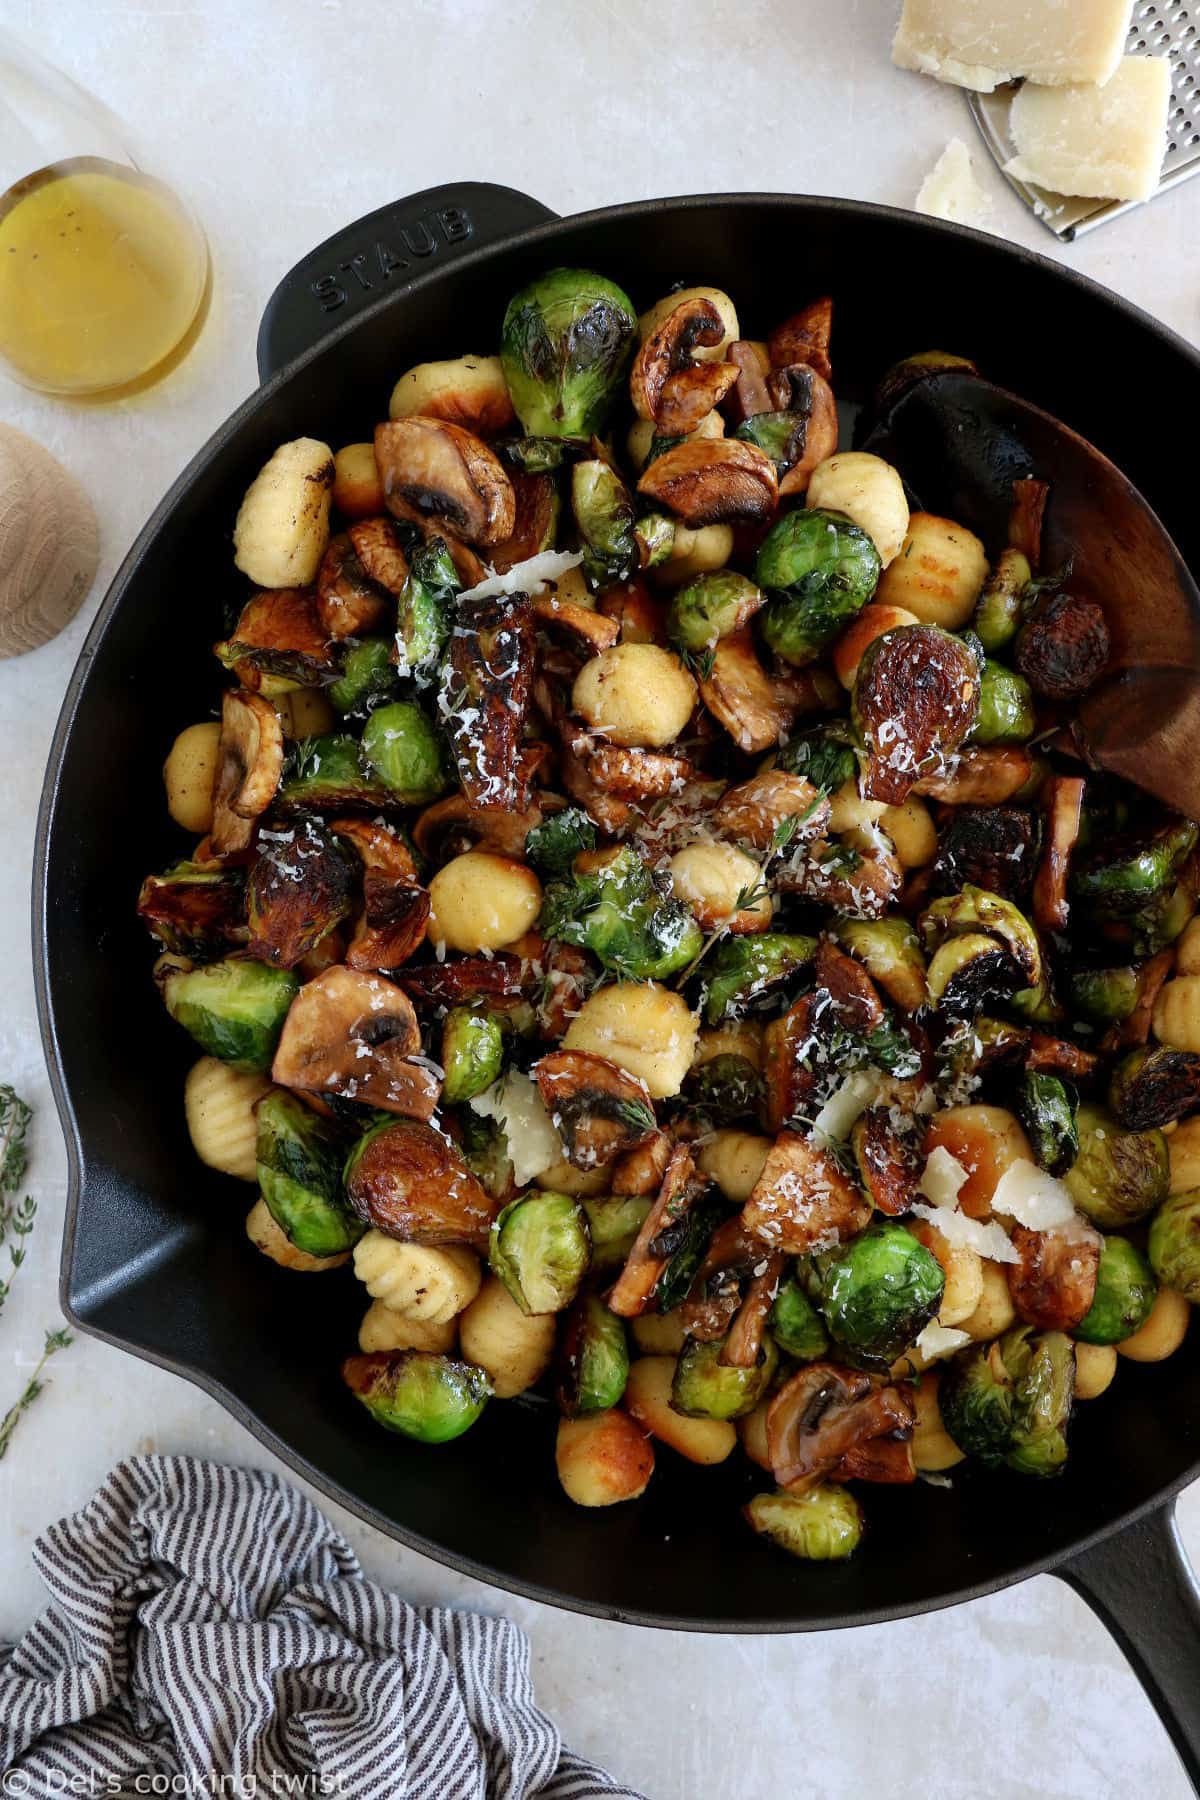 Mushrooms and Brussels sprouts gnocchi feature some crispy maple roasted Brussels sprouts, combined with garlic brown butter pan-fried gnocchi.